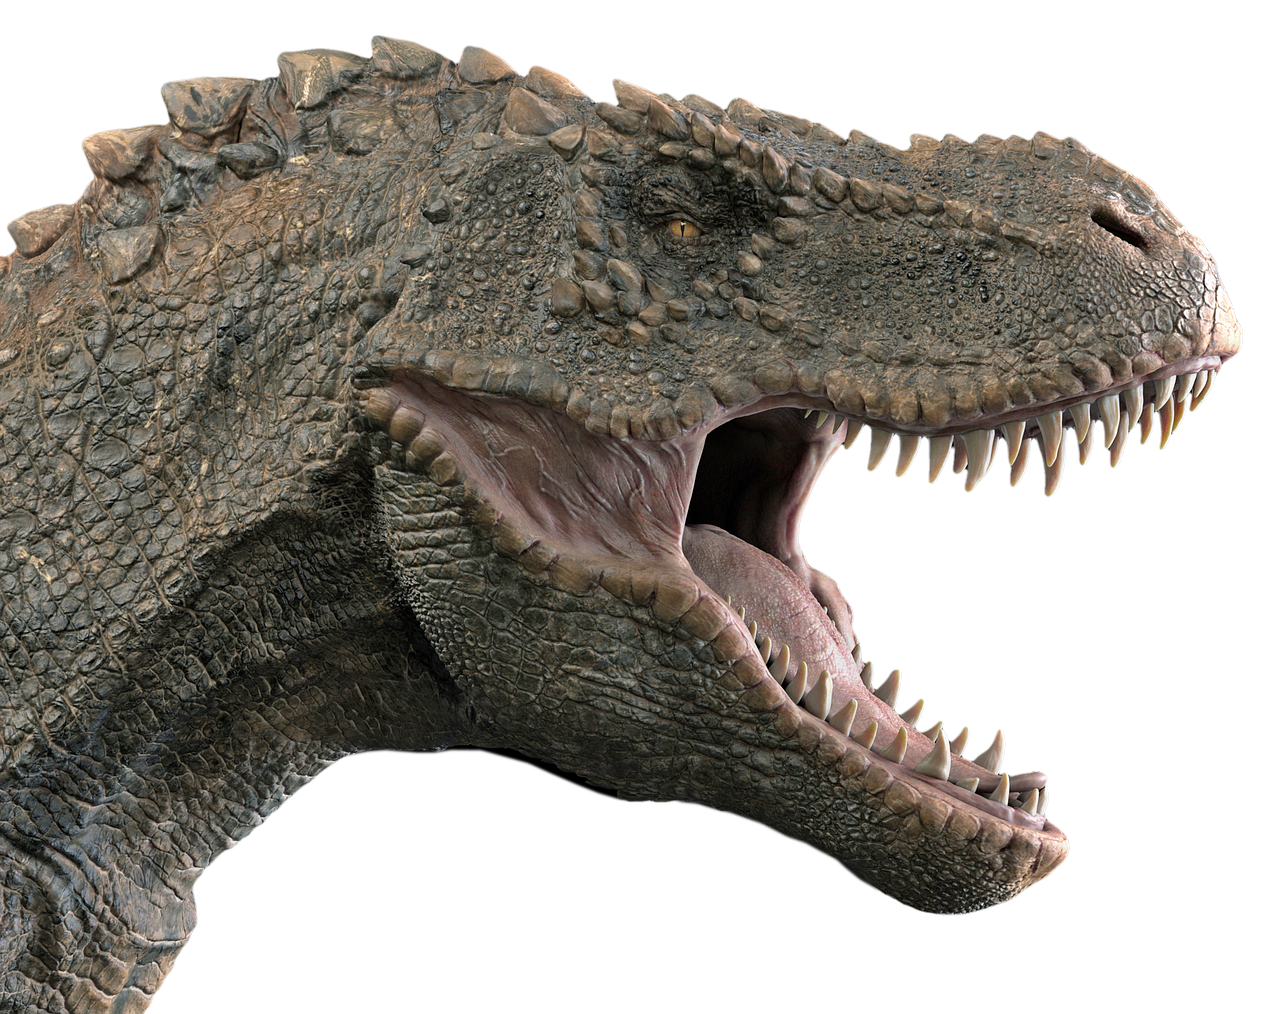 Was T. Rex Designed Specifically for Scavenging? 